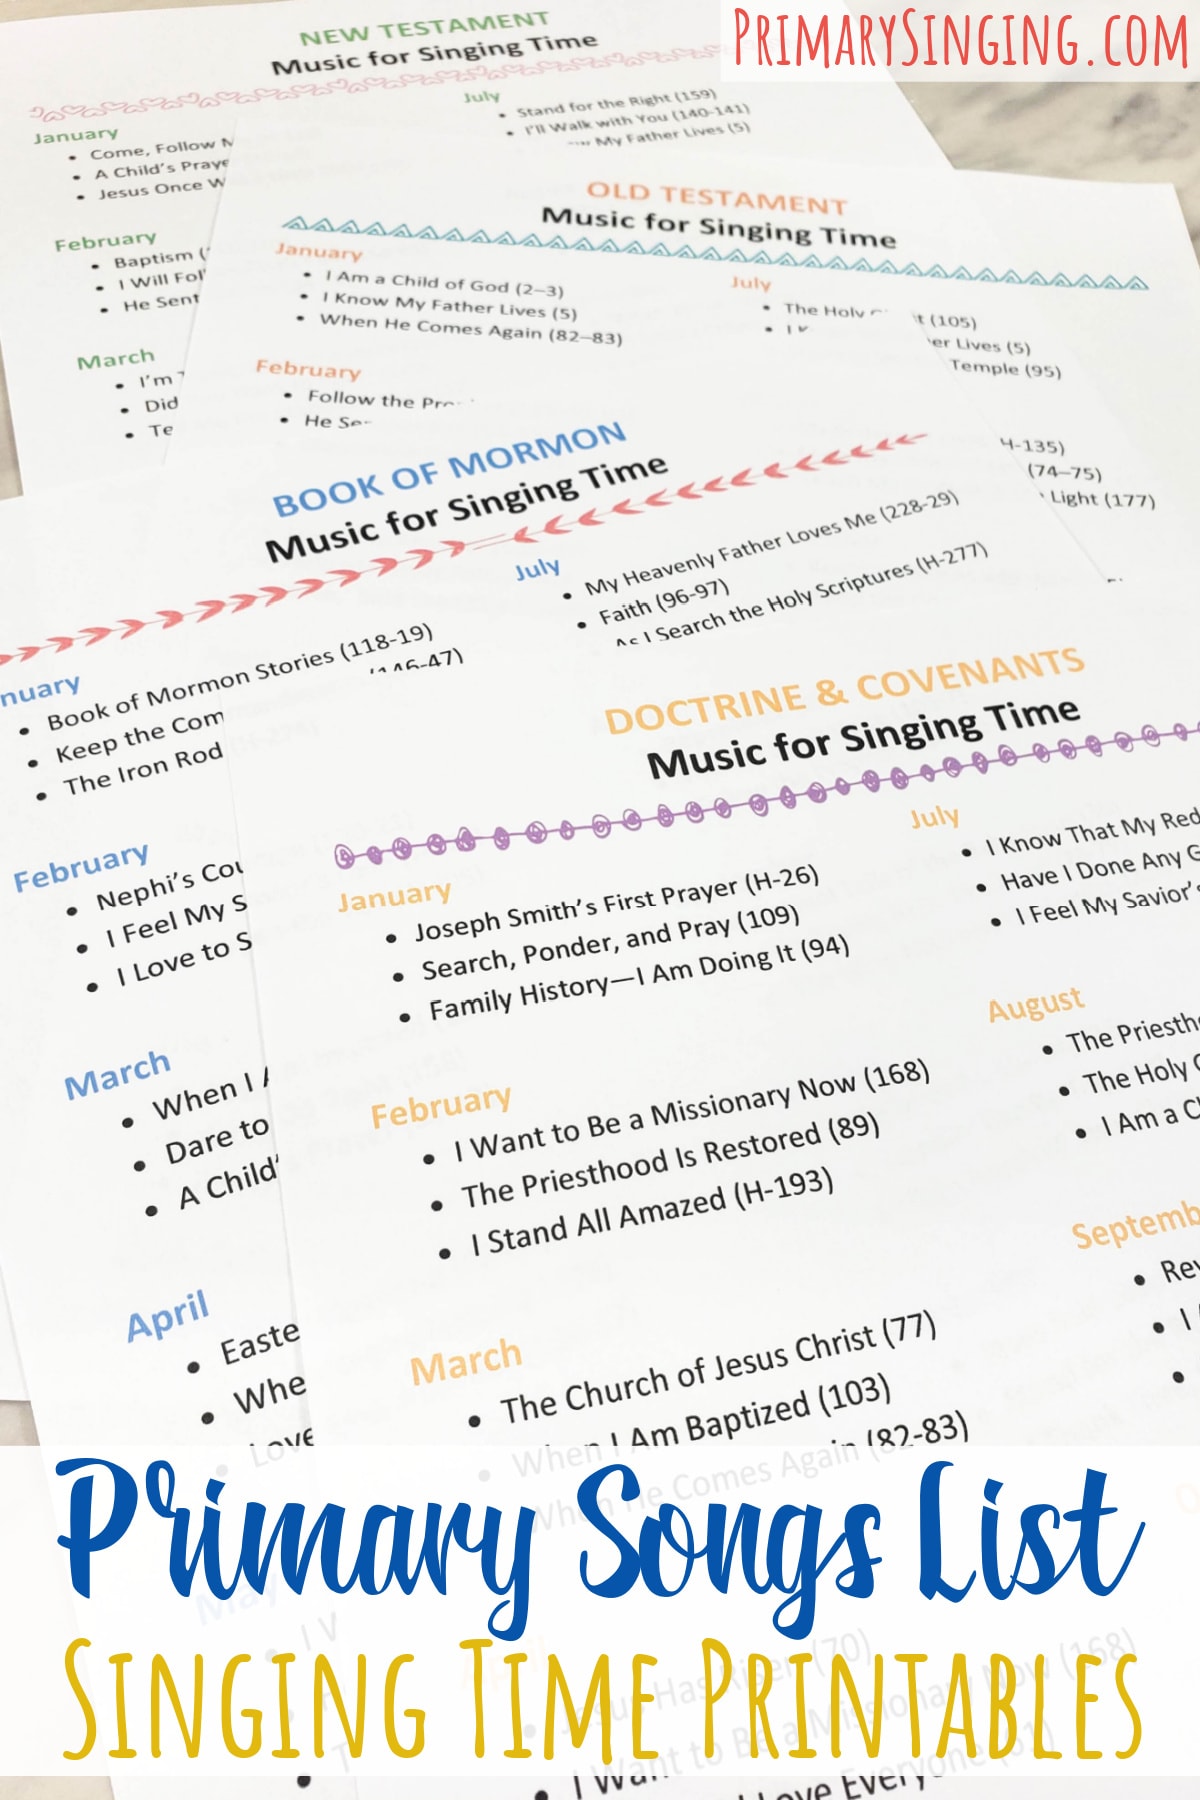 4 years of Come Follow Me LDS Primary songs printable list for Singing Time with music numbers. Plus, ideas + planning helps for all songs for Music leaders. Old Testament, New Testament, Book of Mormon, and Doctrine & Covenants primary song lists!